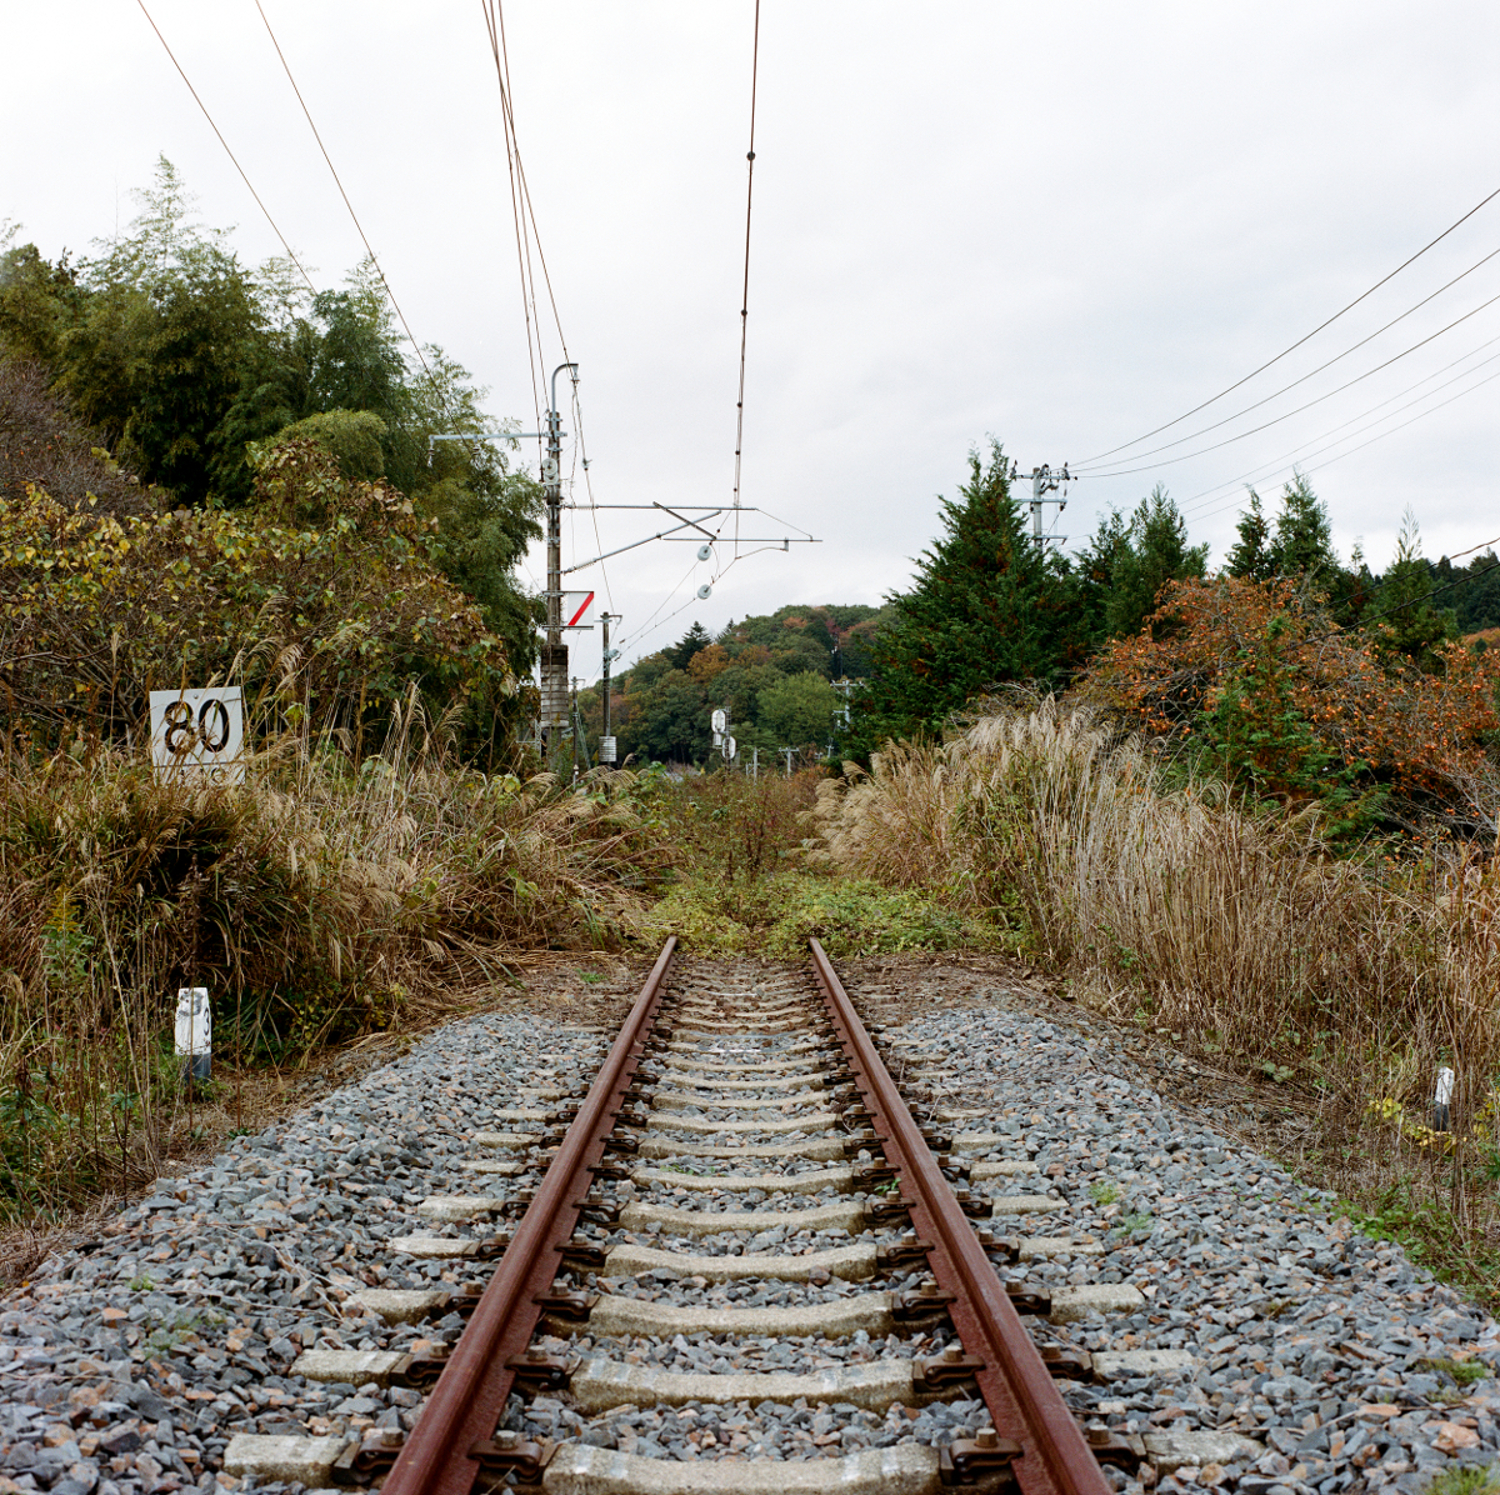  Further north to Naraha, the Joban train line used to run until Minamisoma; but as its route pass through a still too contaminated zone, the line presently ends quite abruptly in the bushes at the edge of town.    